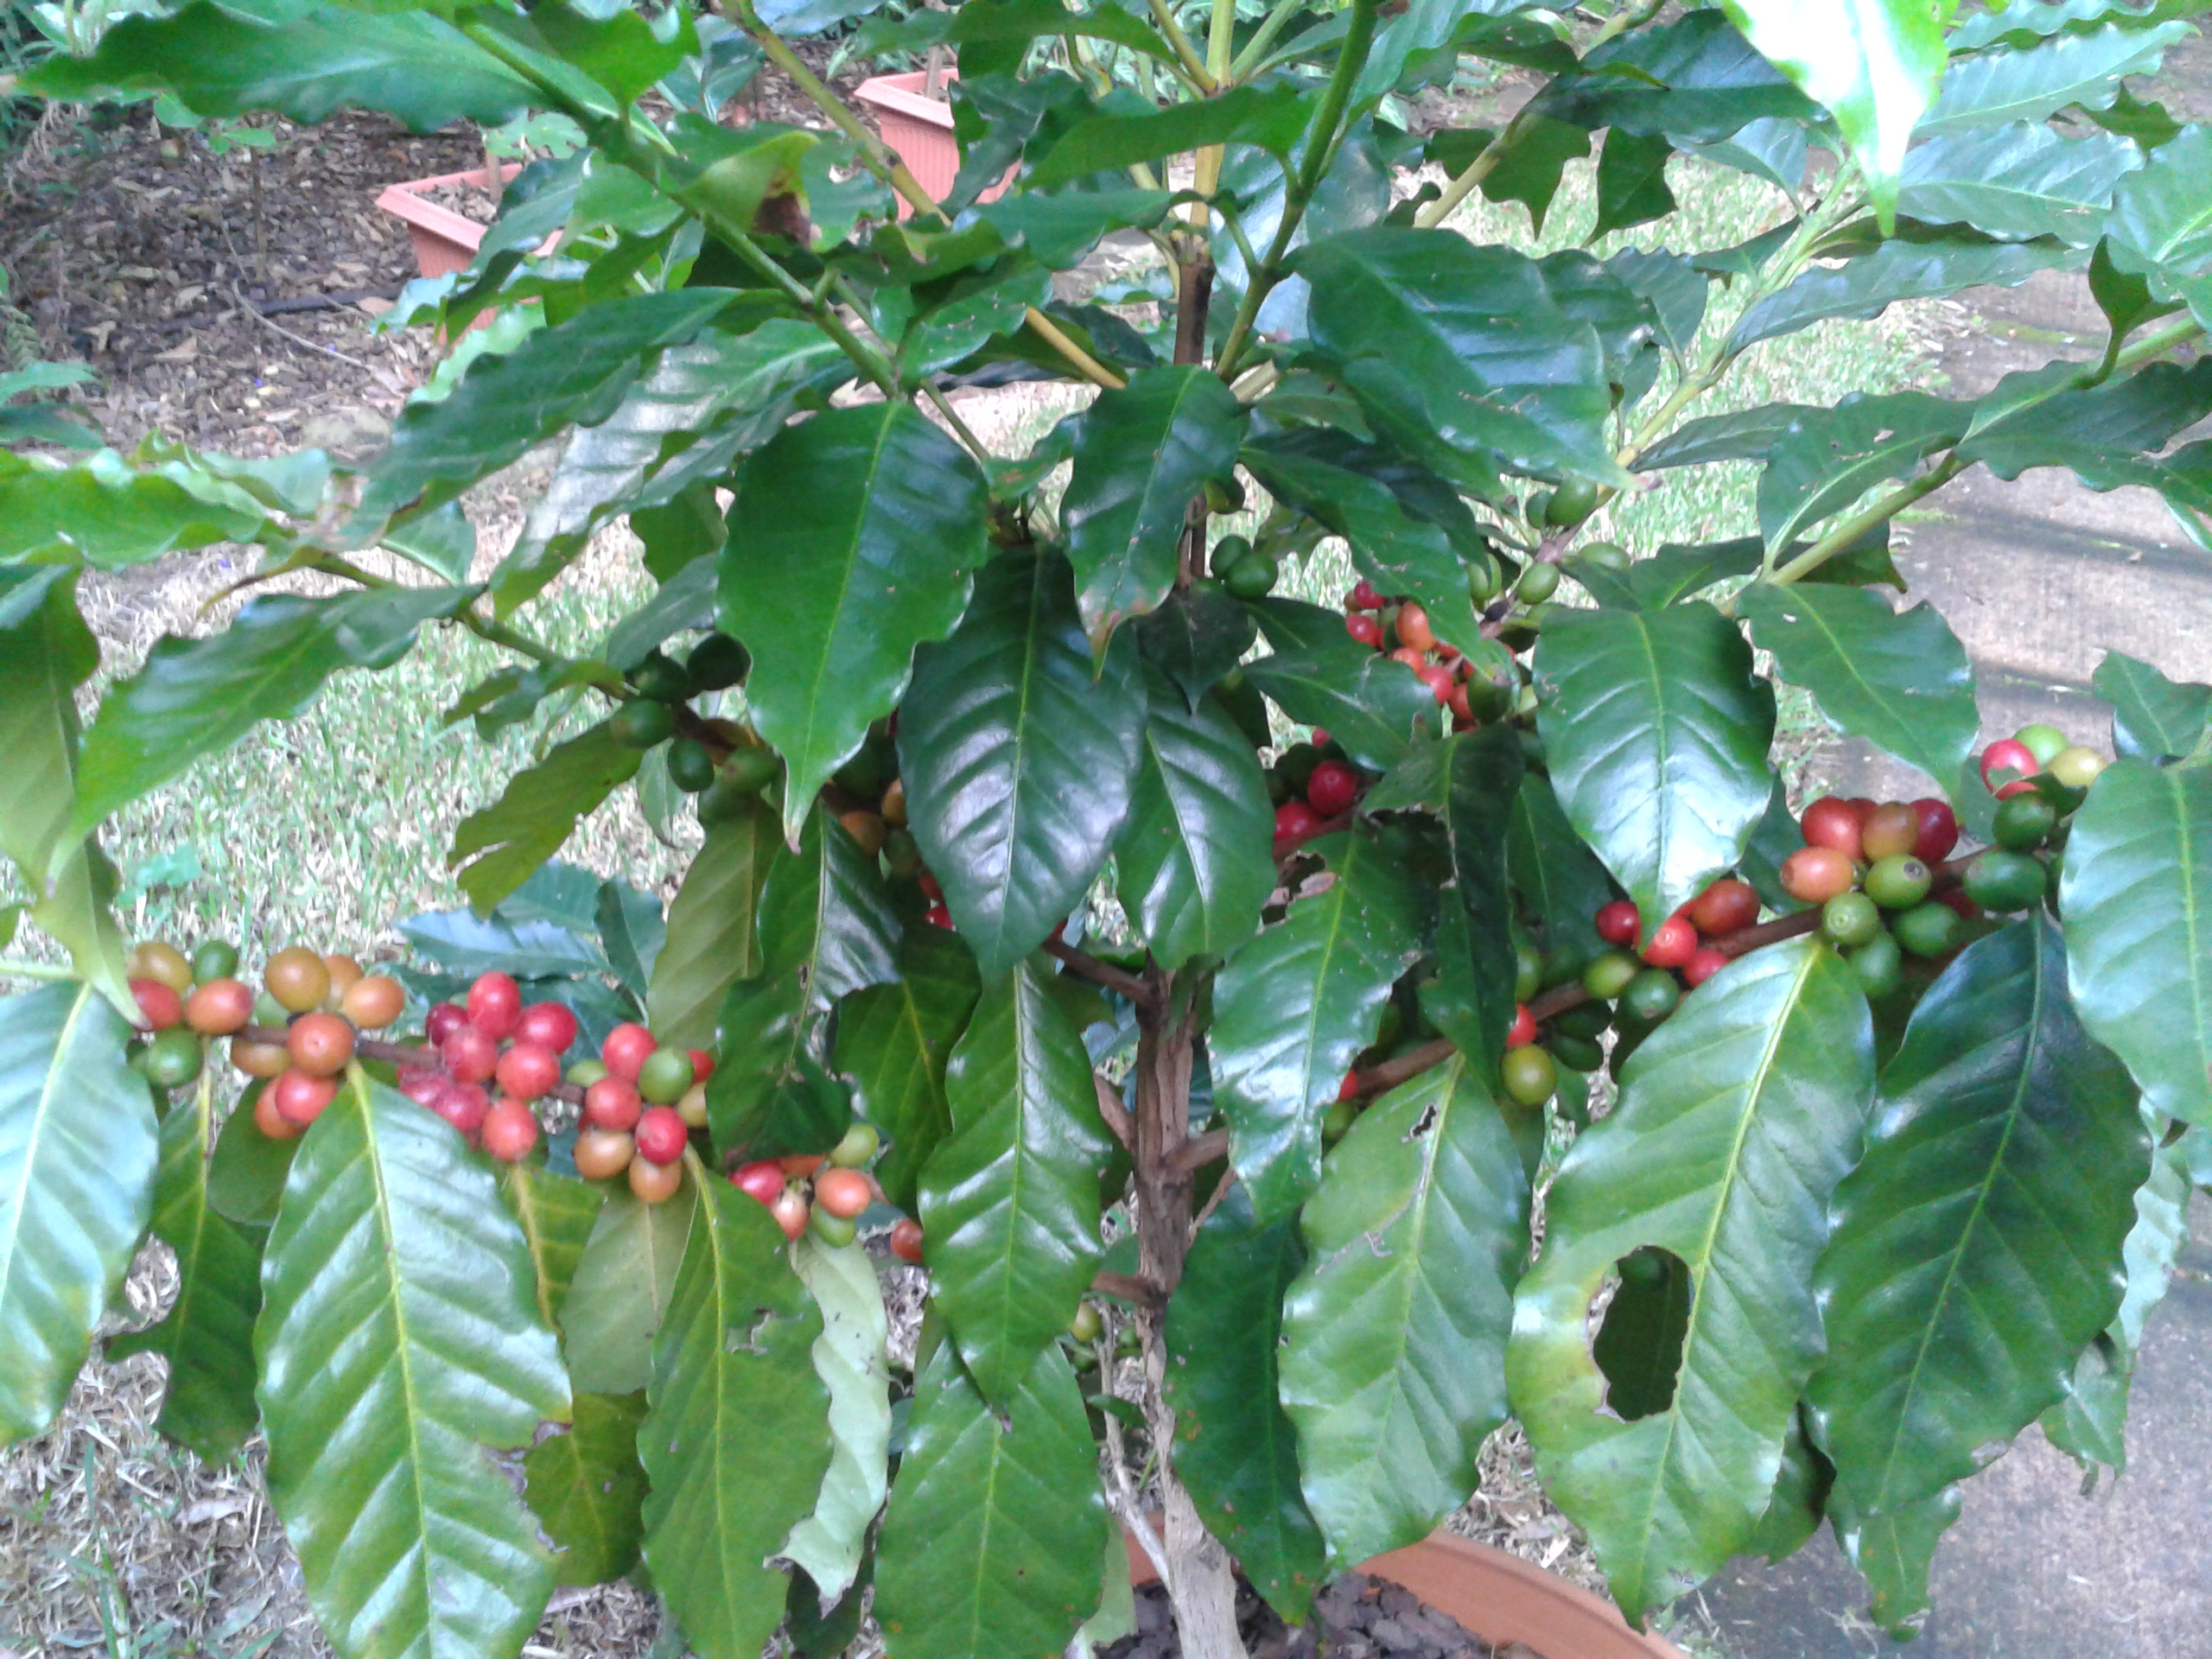 Coffee tree cultivation – an interesting addition in your garden